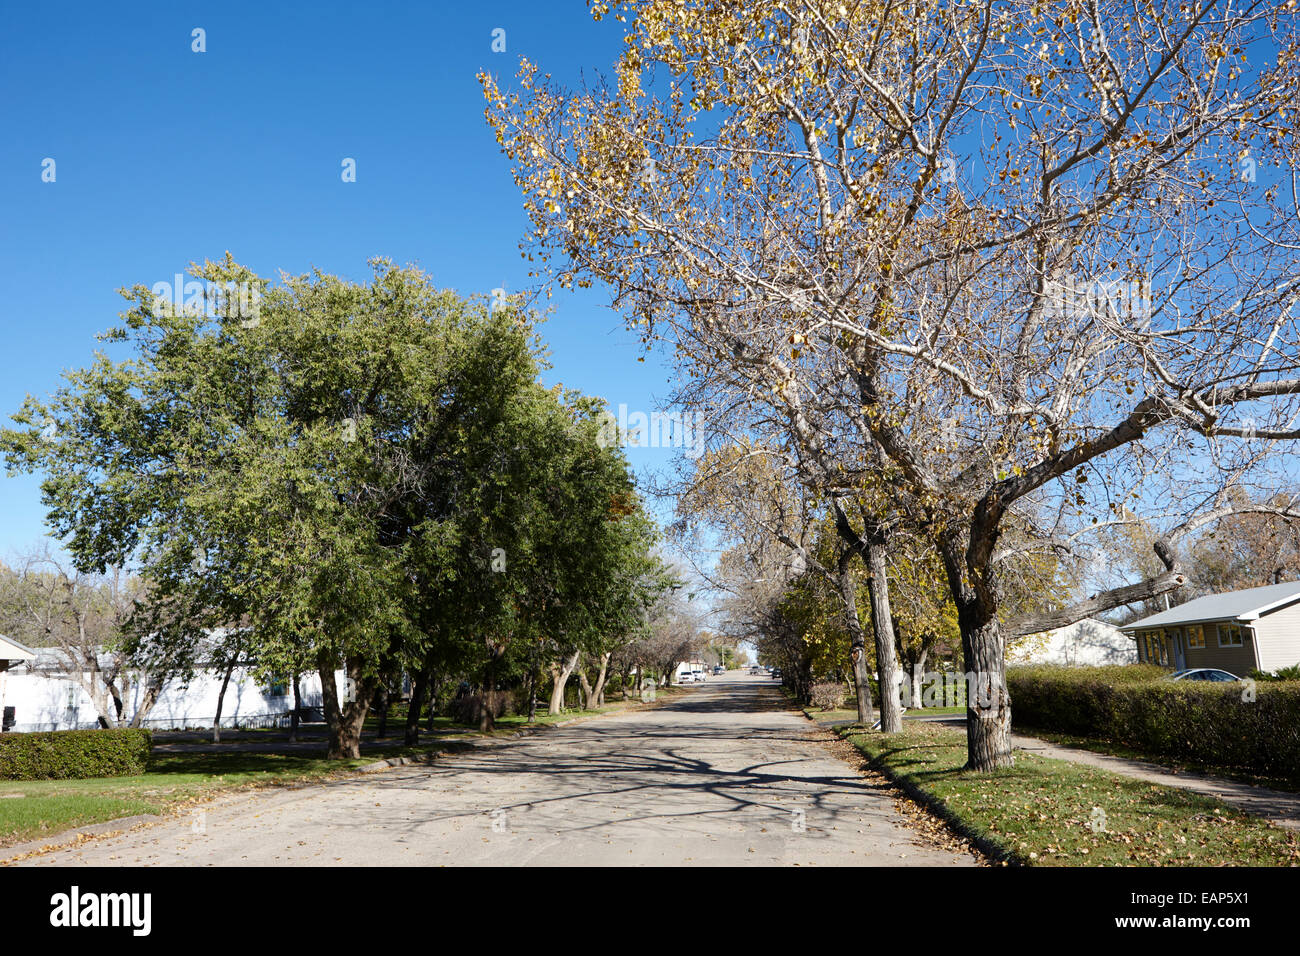 tree lined street in small rural town of Bengough Saskatchewan Canada Stock Photo